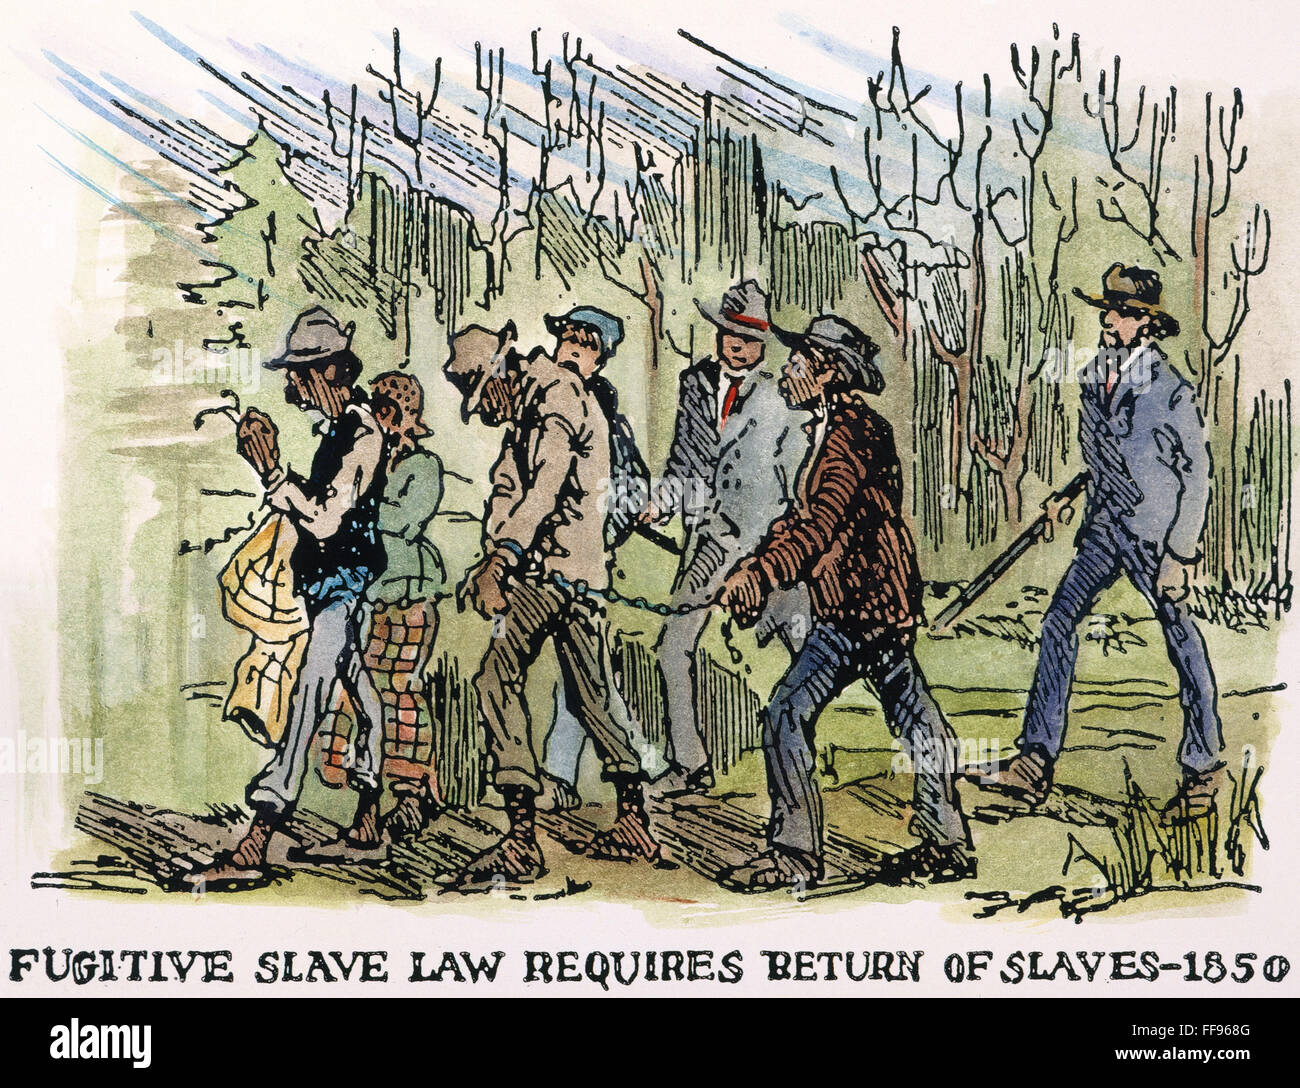 FUGITIVE SLAVE ACT, 1850. /nA band of runaway slaves in chains rounded up for return to their owners under the provisions of the Fugitive Slave Act of 1850: American drawing. Stock Photo